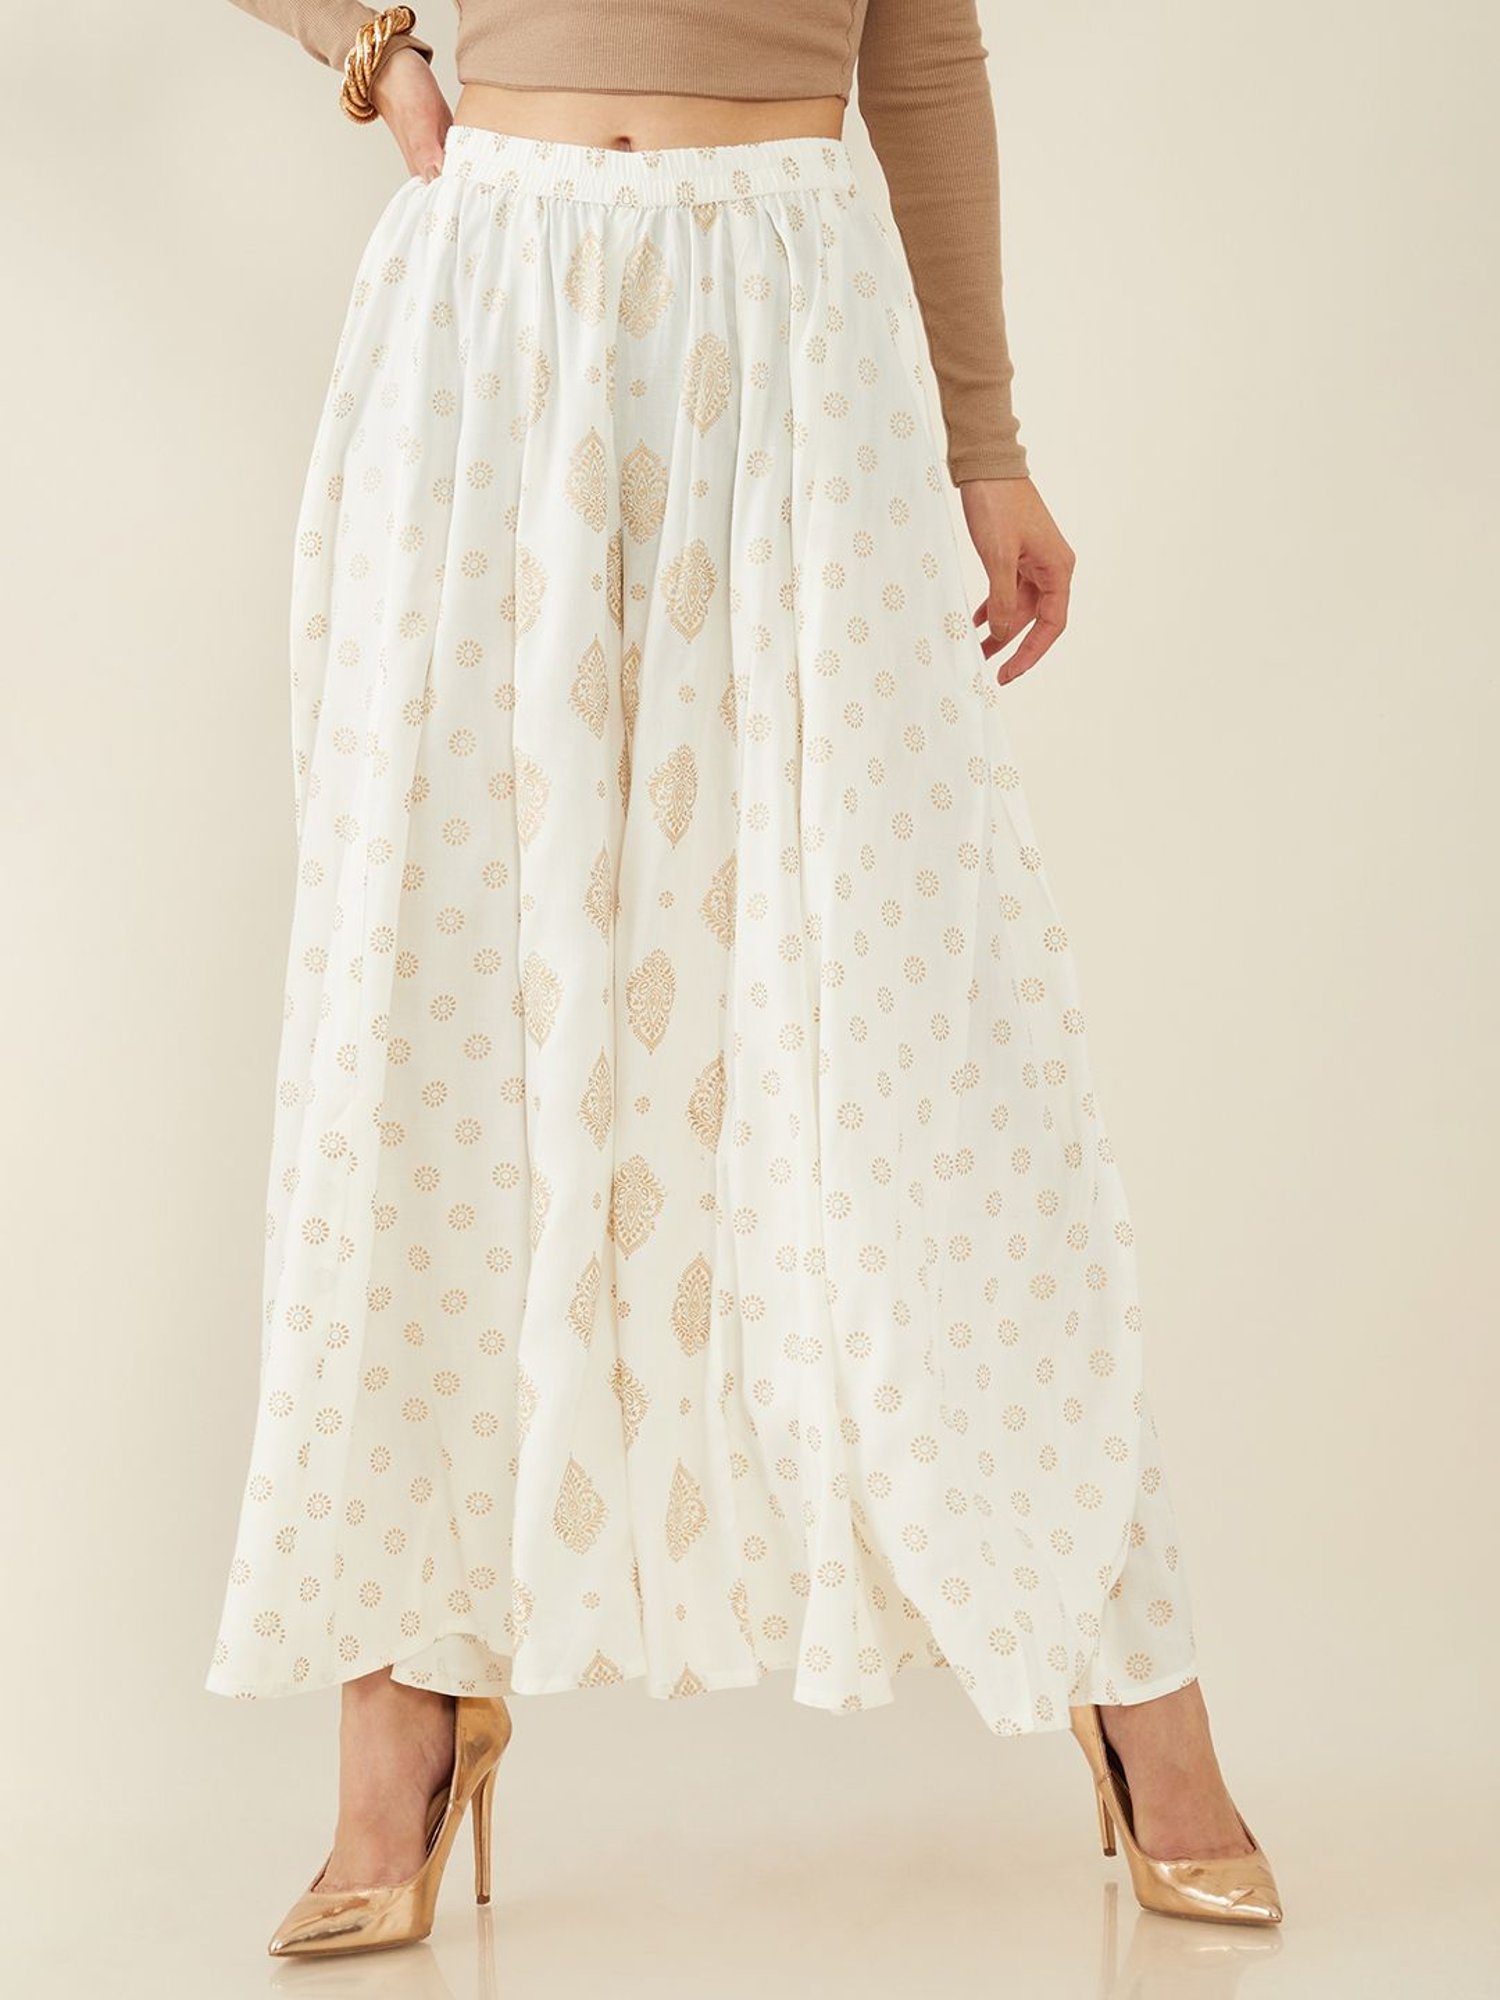 Buy Latest Palazzo Pants for Women Online in India  Soch